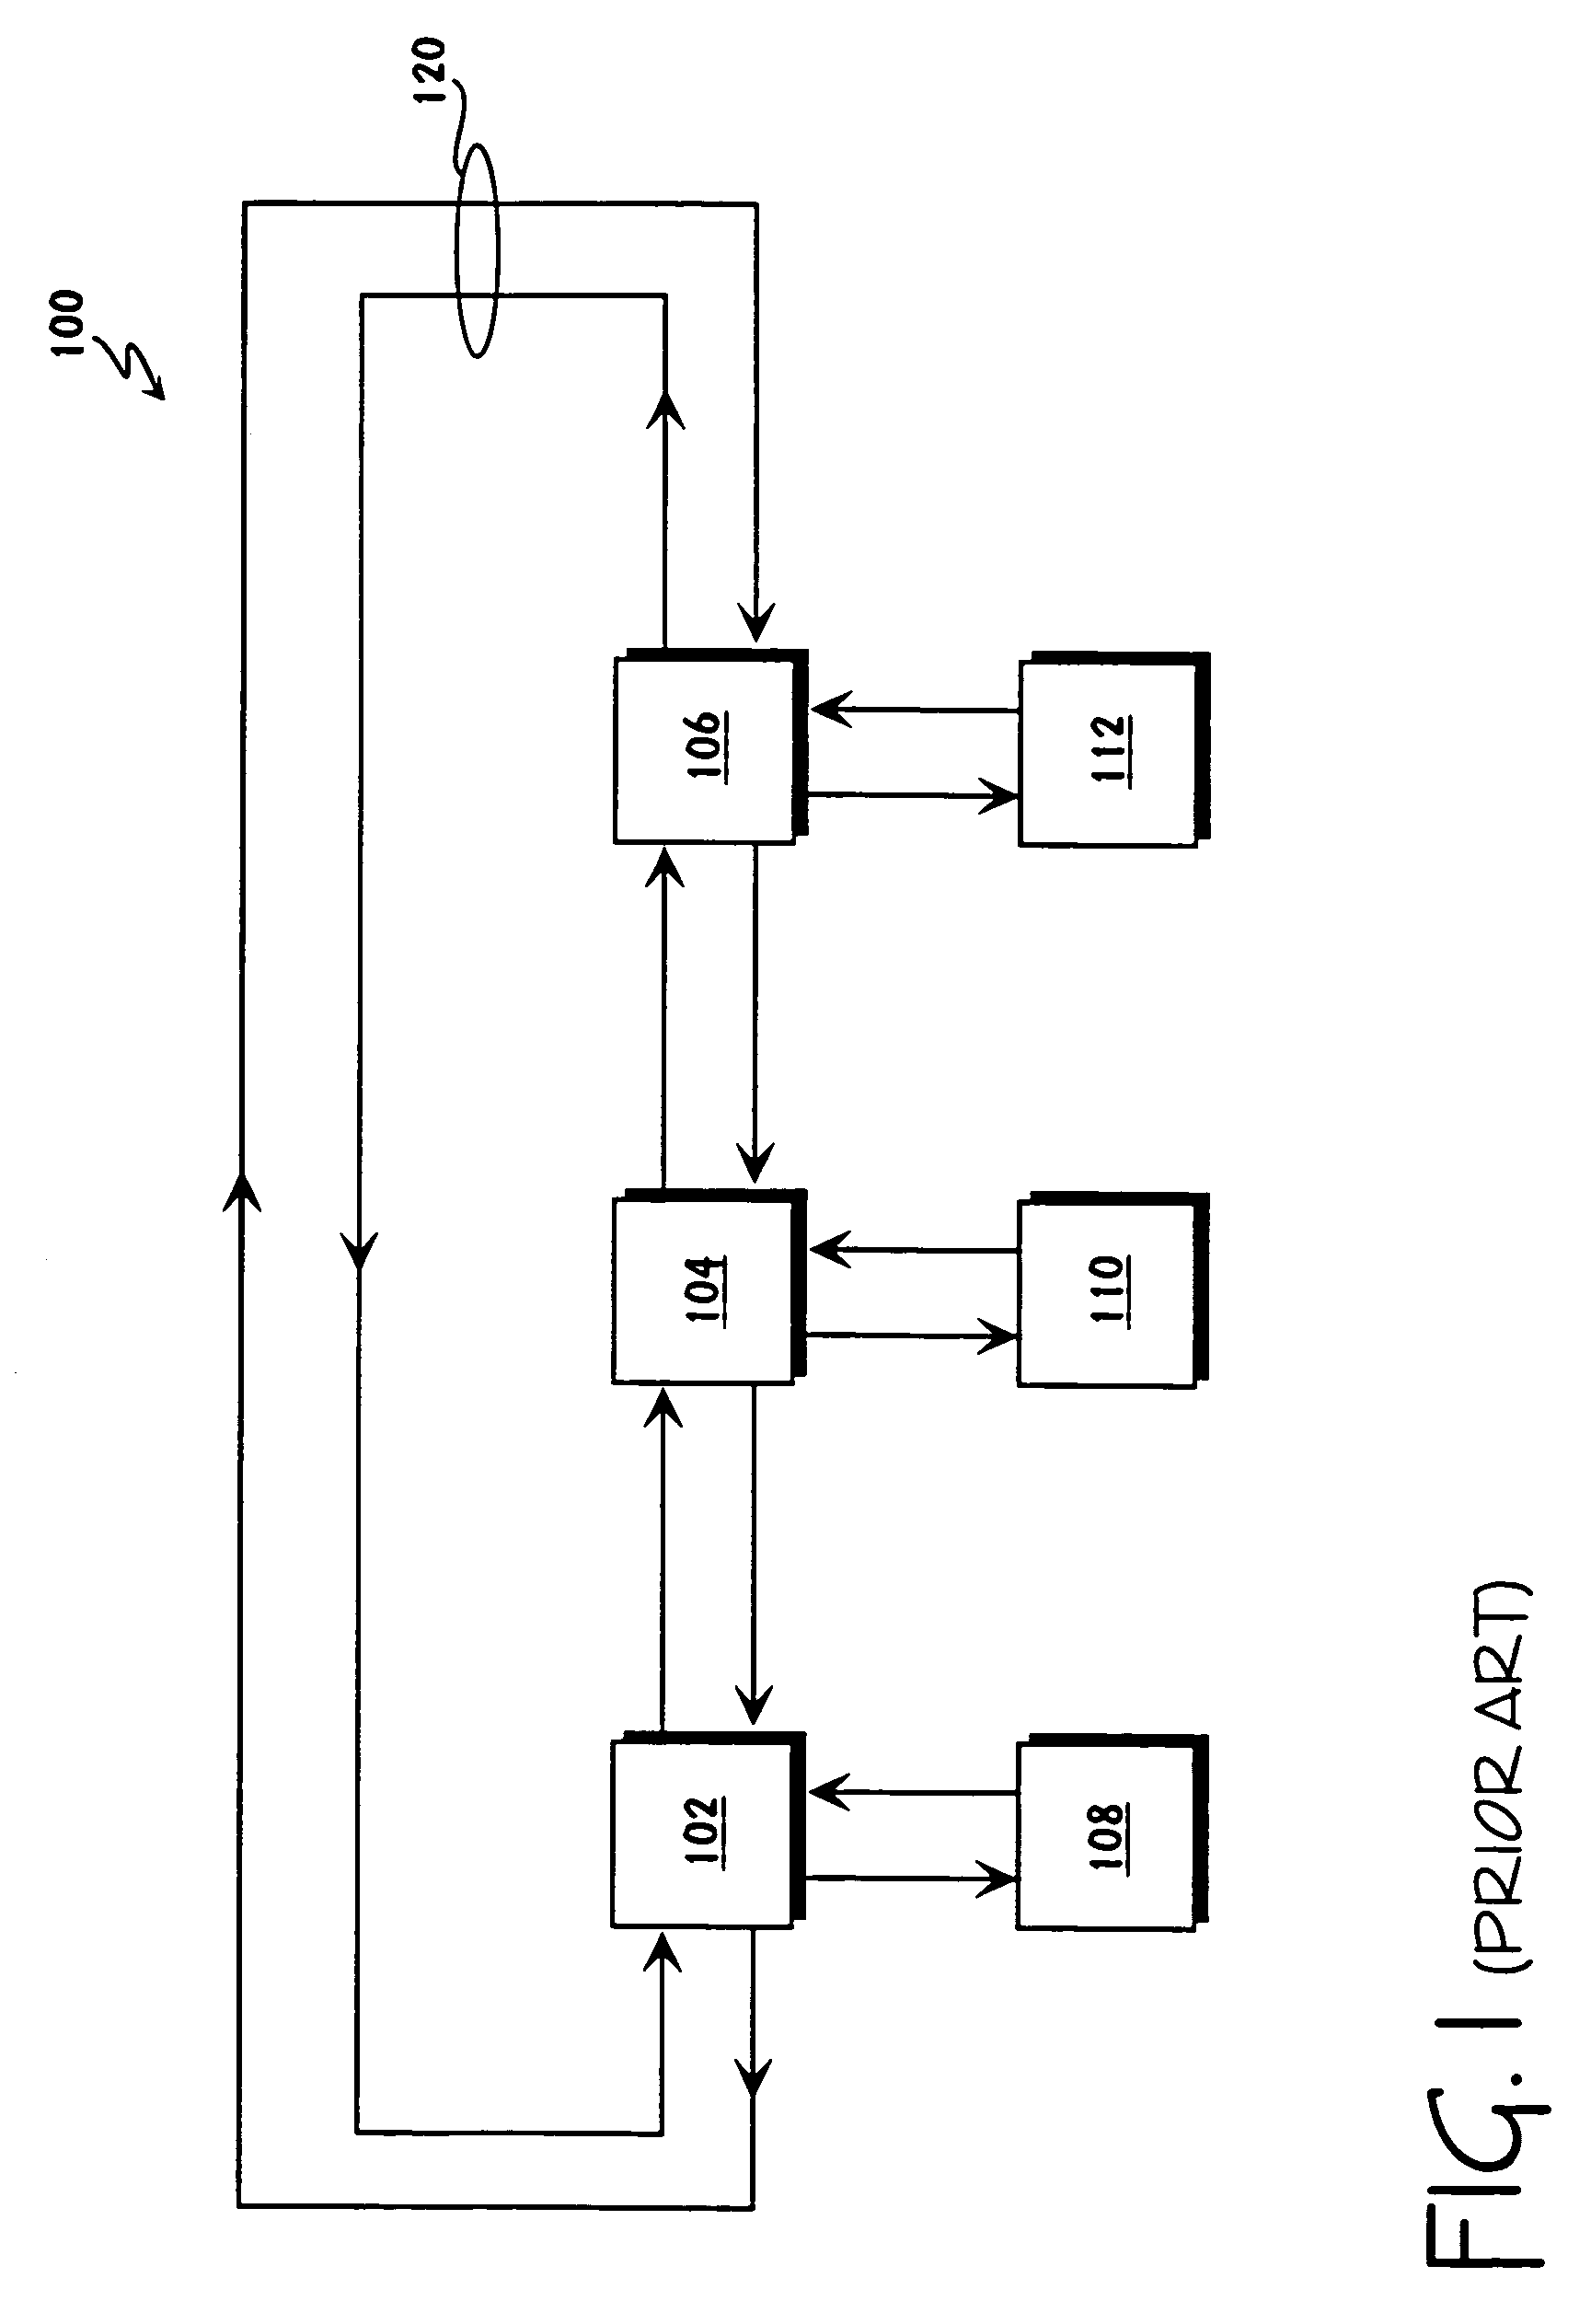 Interface transmitter for communications among network elements